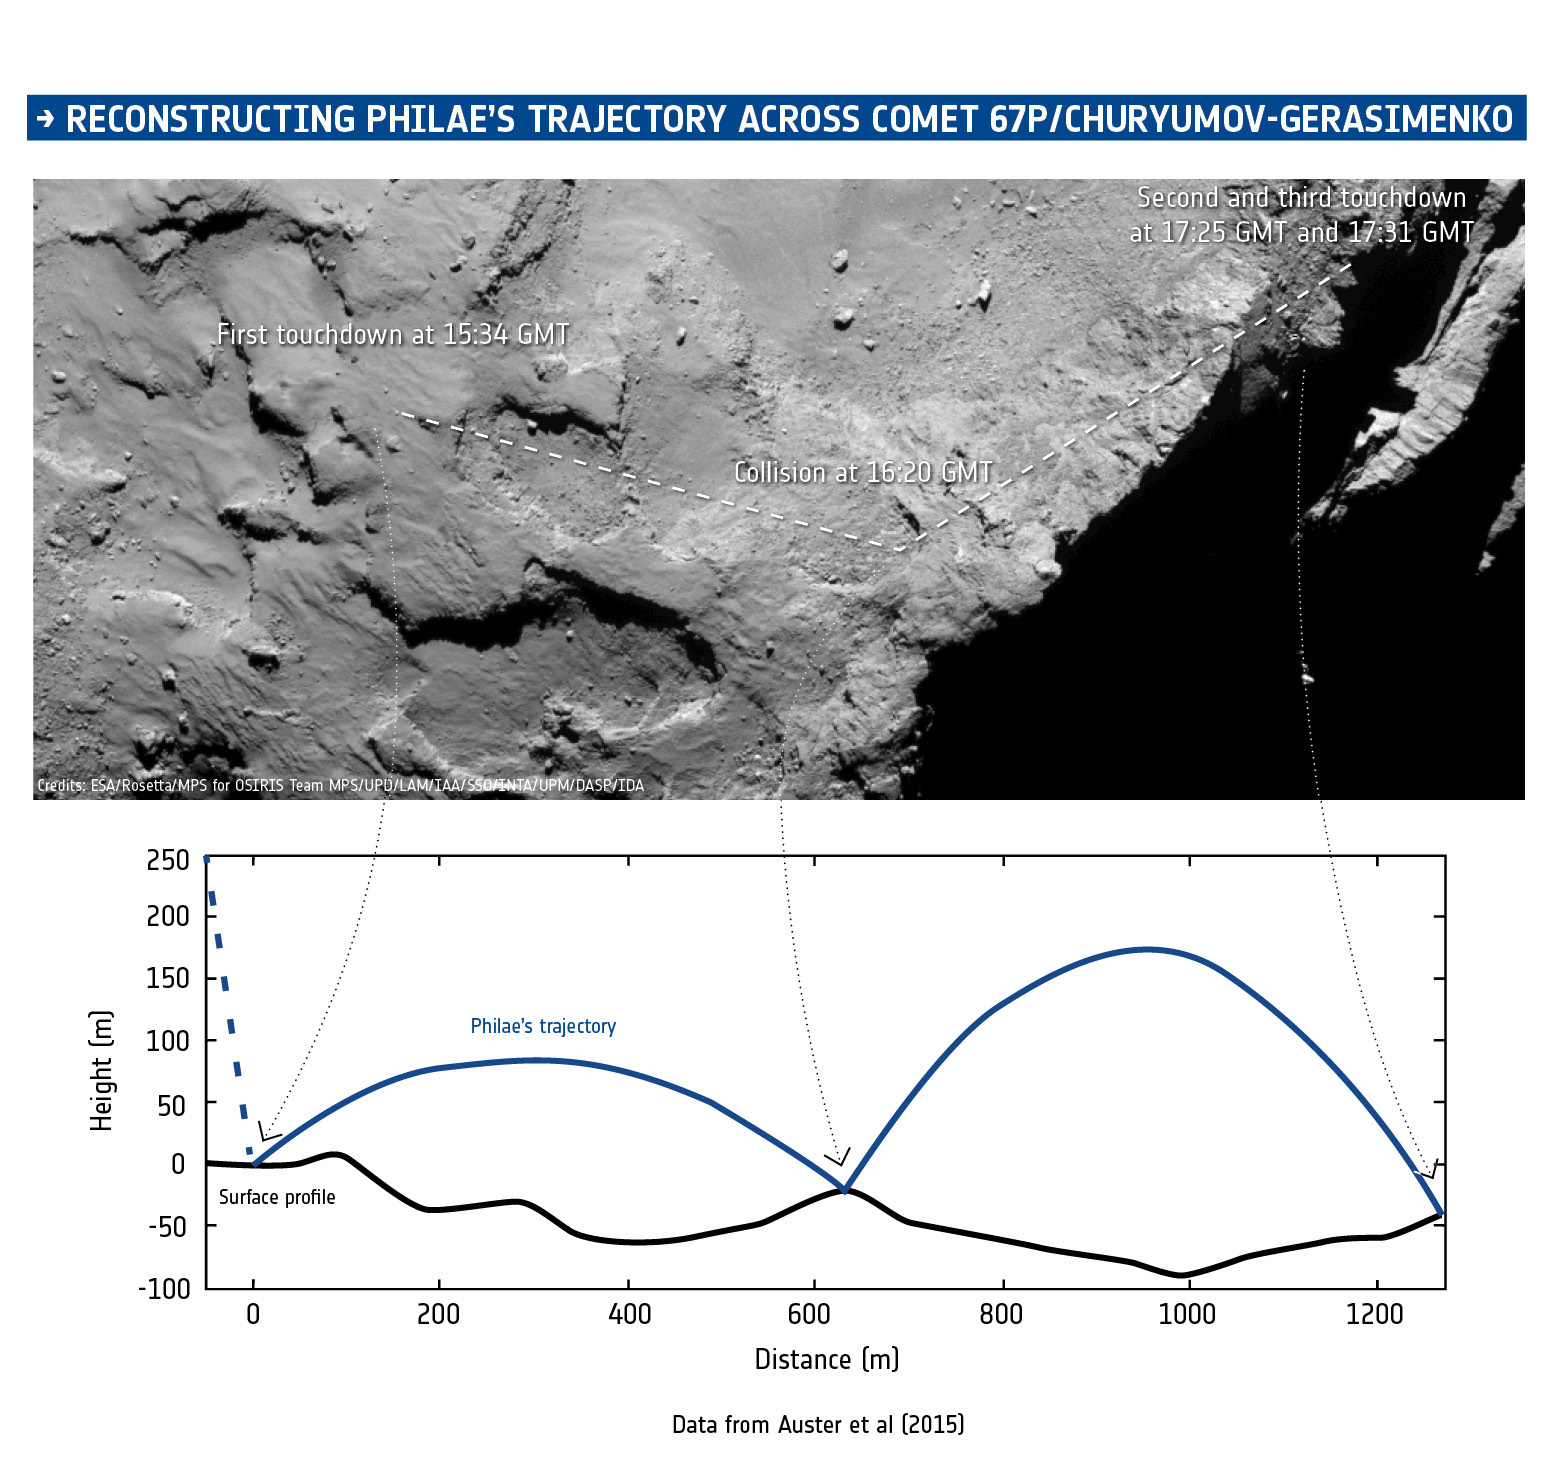 Reconstructing Philae’s trajectory. Magnetic field data from ROMAP on Philae, combined with information from the CONSERT experiment that provided an estimate of the final landing region, timing information, images from Rosetta’s OSIRIS camera, assumptions about the gravity of the comet, and measurements of its shape, have been used to reconstruct the trajectory of the lander during its descent and subsequent landings on and bounces over the surface of Comet 67P/Churyumov-Gerasimenko on 12 November 2014. The times are as recorded by the spacecraft; the confirmation signals arrived on Earth 28 minutes later.  Credit: ESA/Data: Auster et al. (2015)/Comet image: ESA/Rosetta/MPS for OSIRIS Team MPS/UPD/LAM/IAA/SSO/INTA/UPM/DASP/IDA